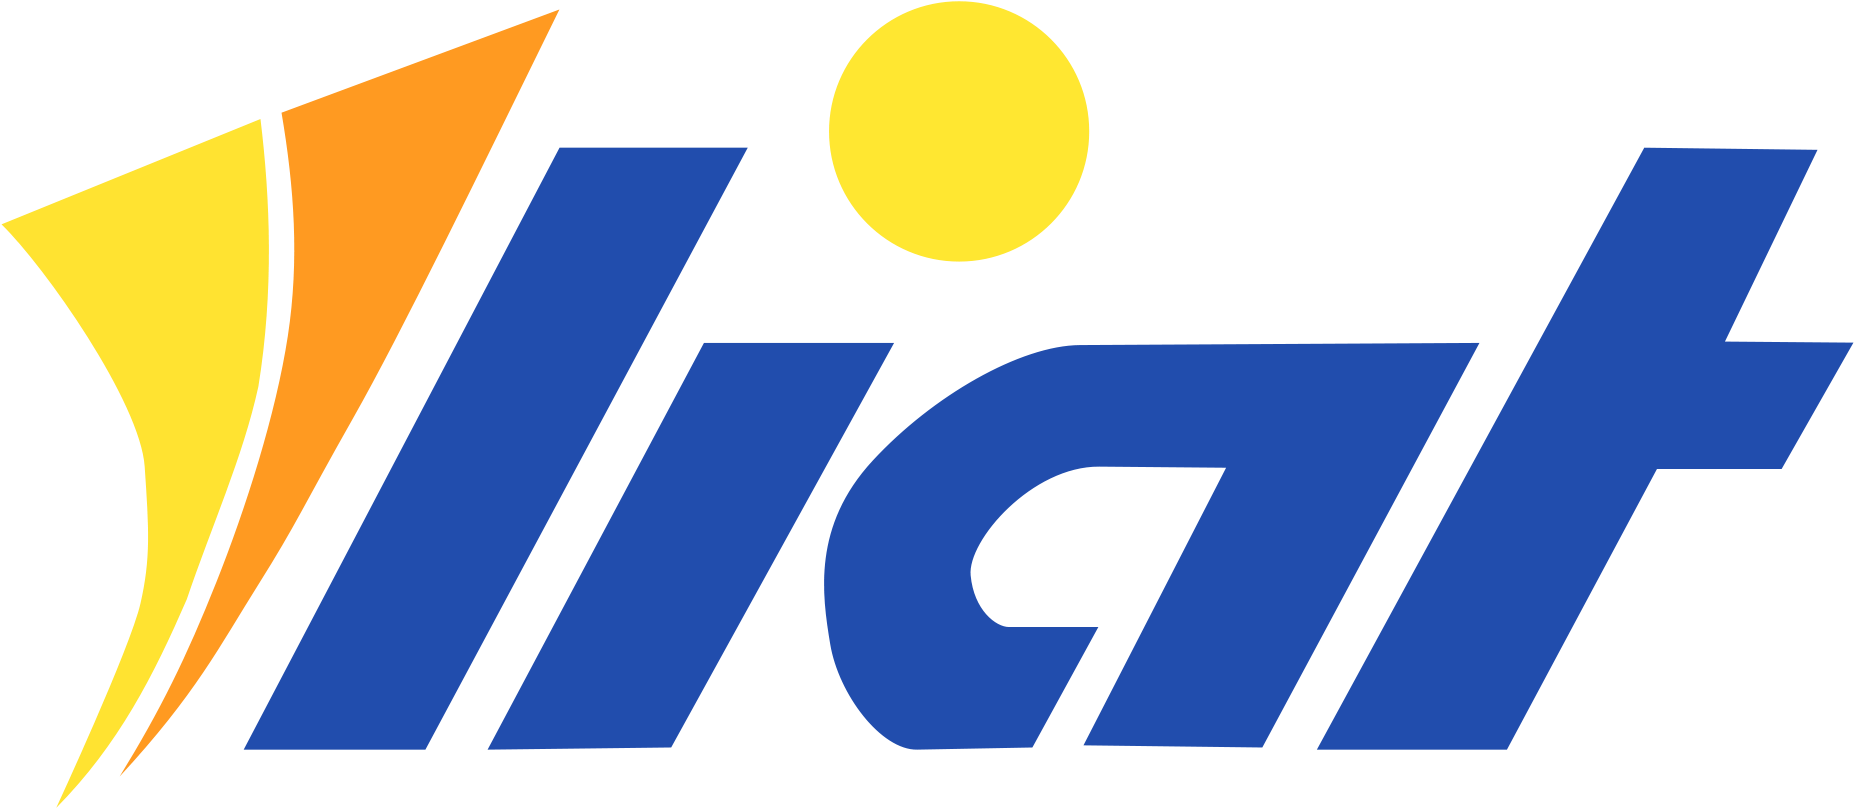 Liat Congratulates Dominica On 37 Years Of Independence - Liat Airlines (1862x846)